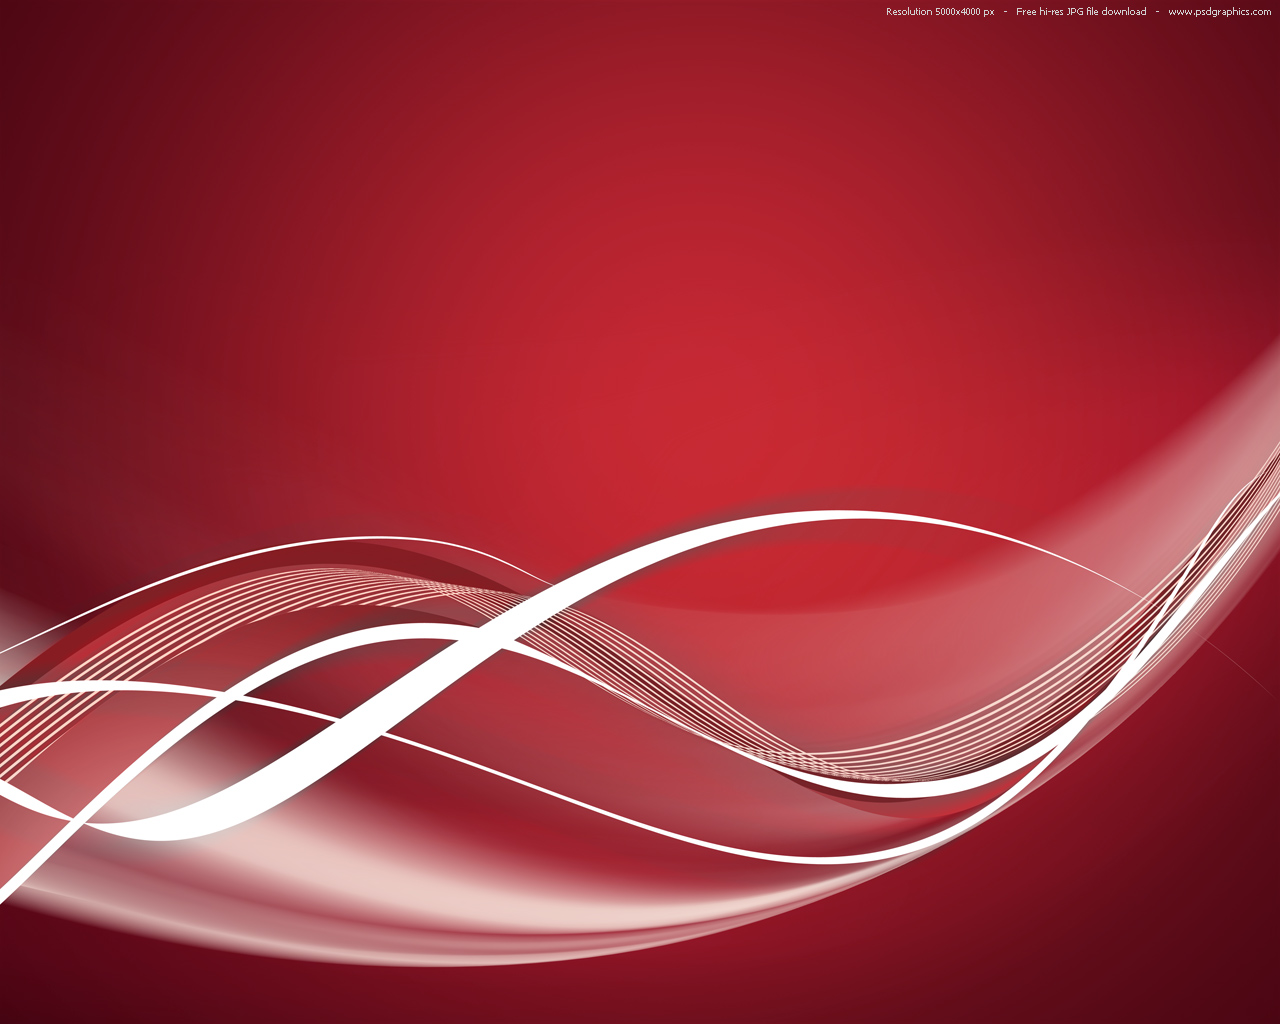 Red And White Graphic Wallpaper Cool Graphic Designs Free Invoice